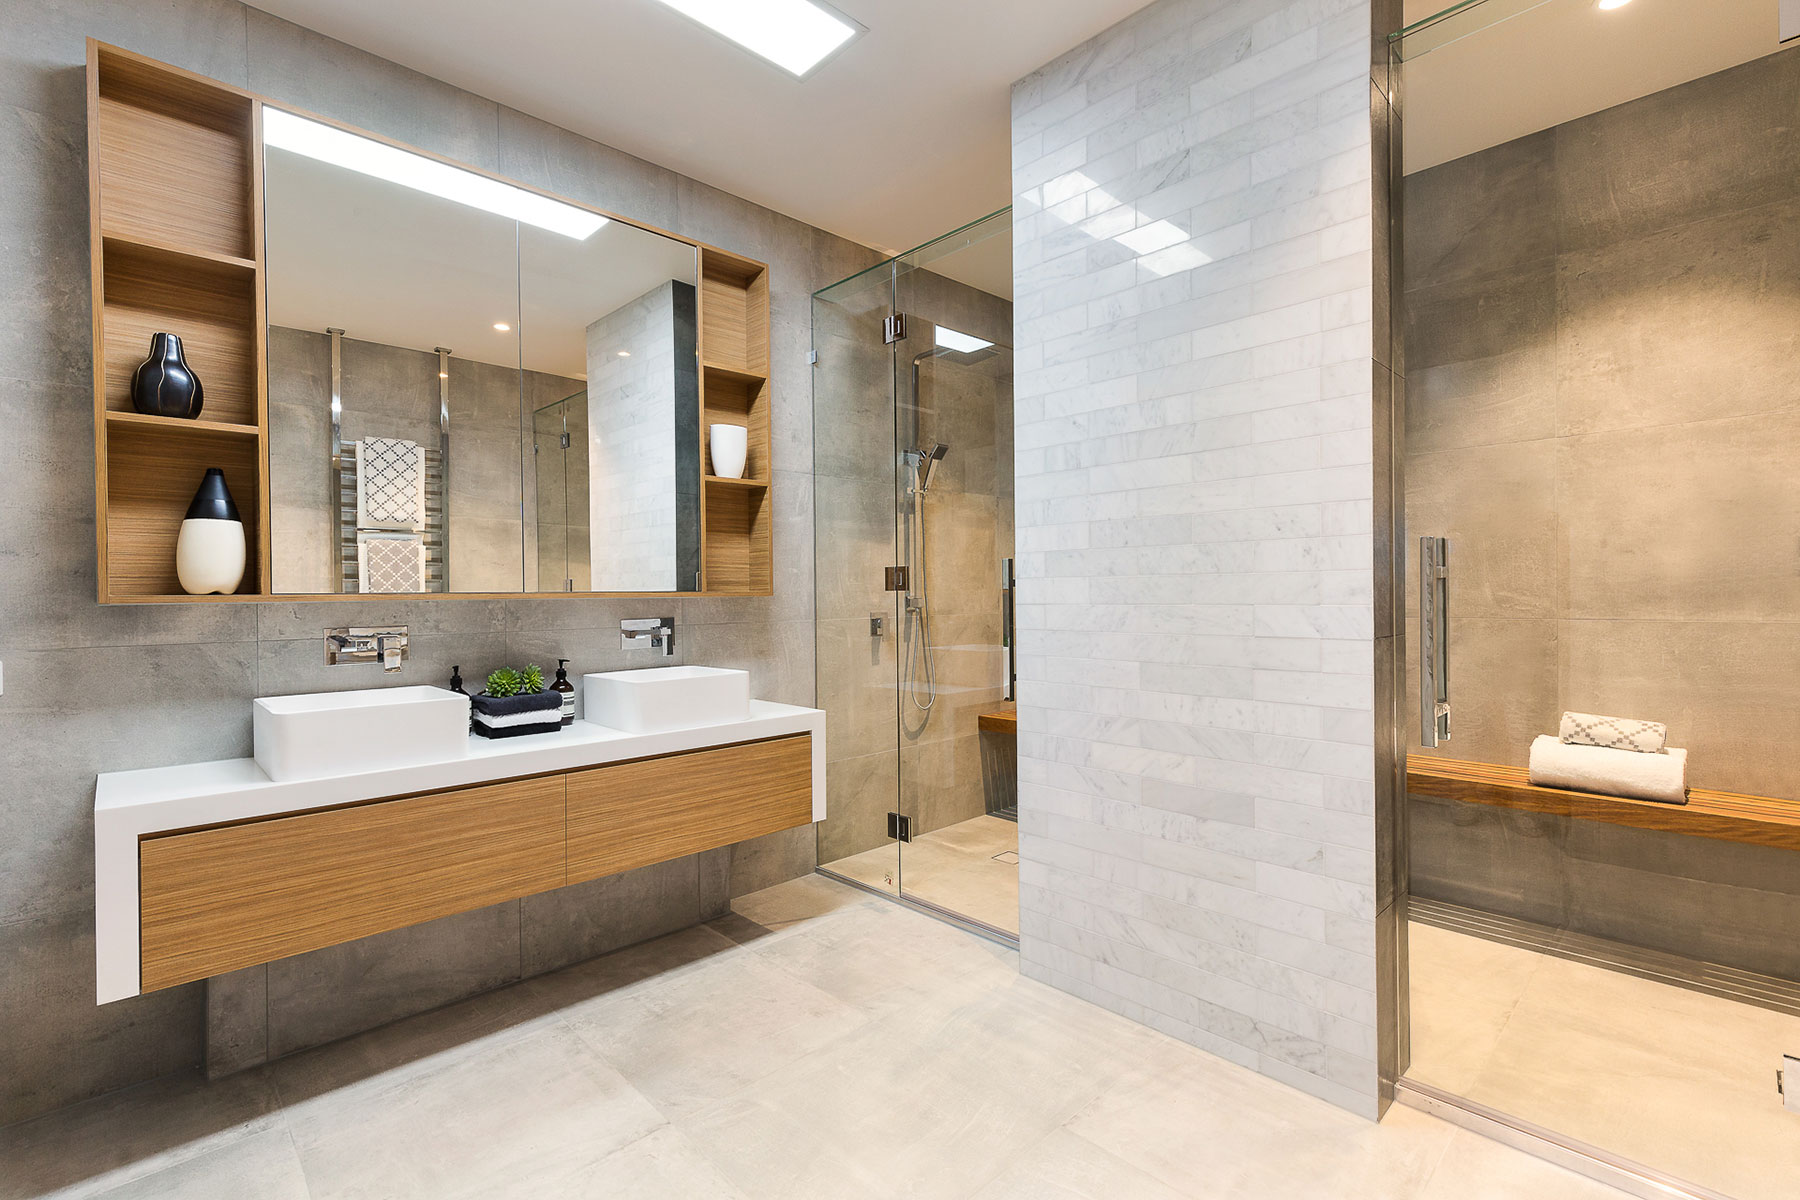 - Home Improvement Contractors in PA -  - Get the Luxury Bathroom with Our Remodeling Services - Home Improvement Contractors in PA -  - Get the Luxury Bathroom with Our Remodeling Services bathroom